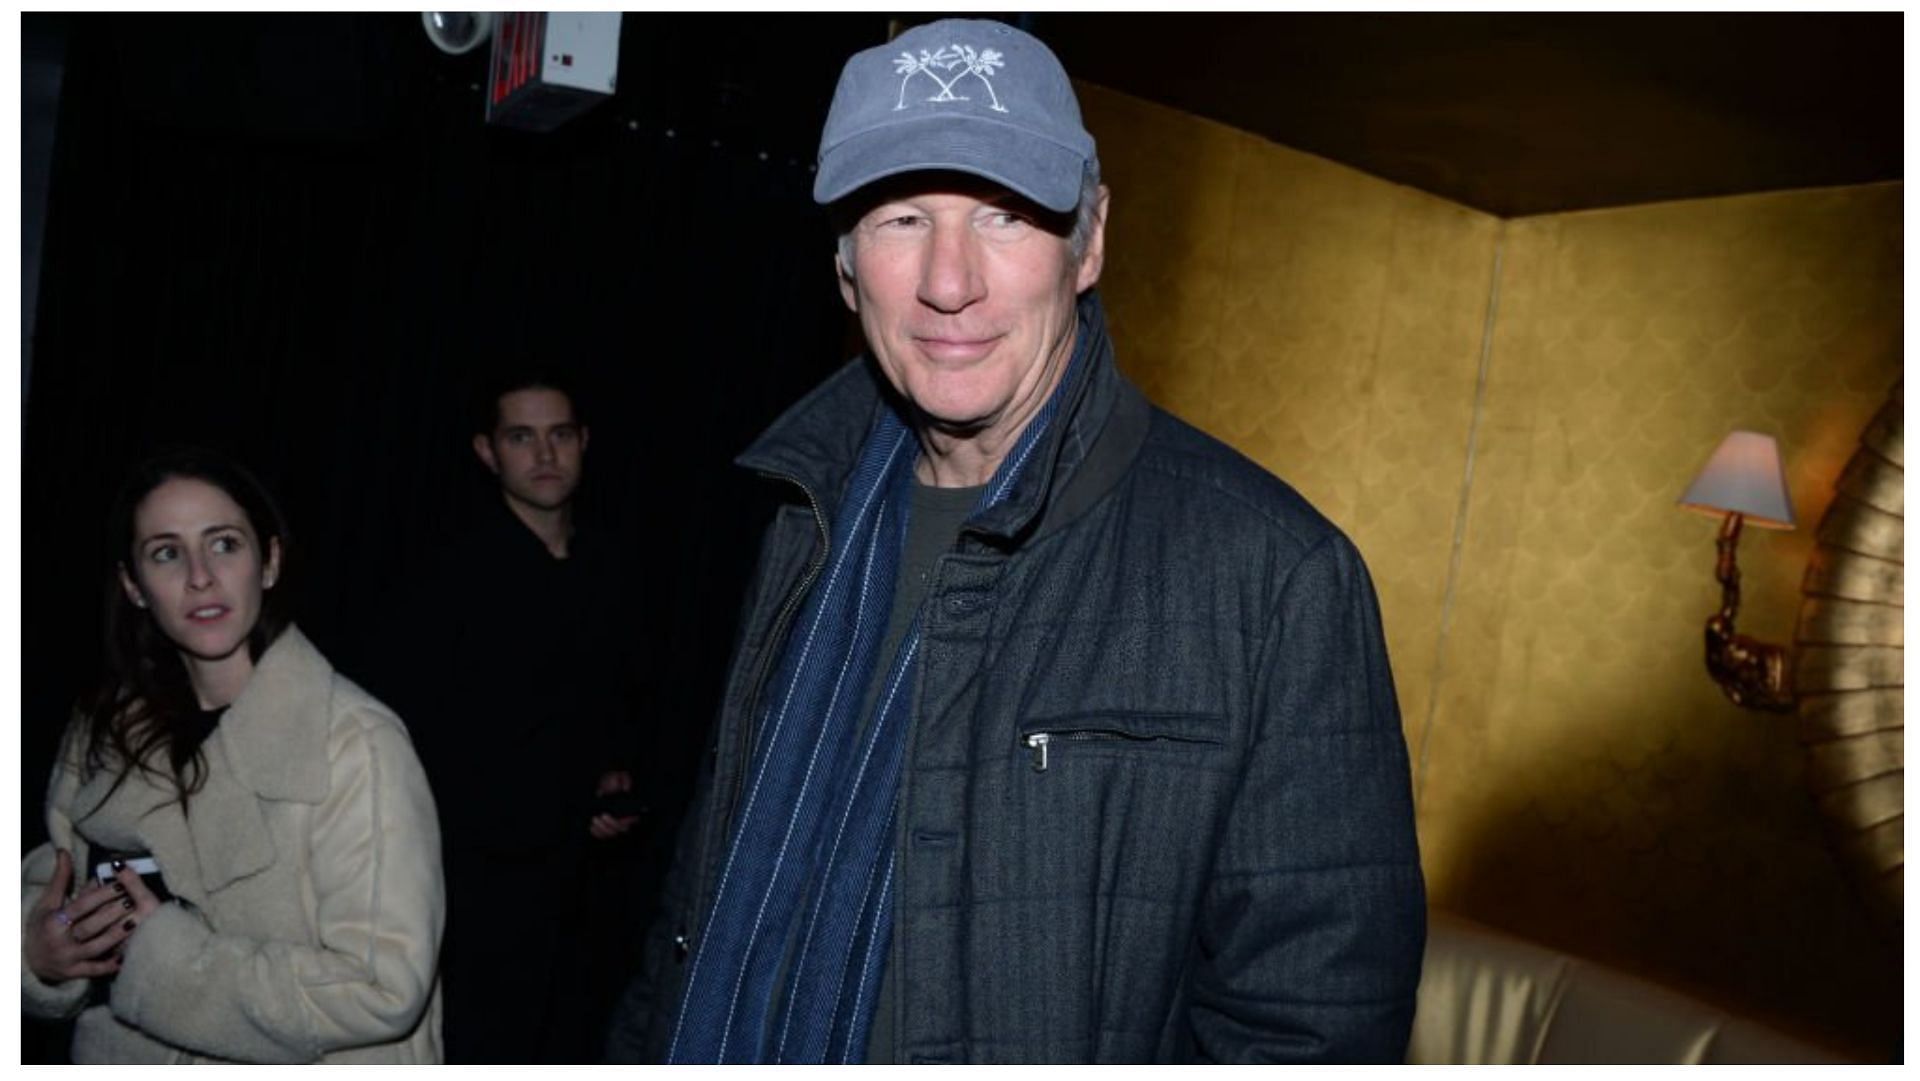 Richard Gere played important roles in several films and television series (Image via Paul Bruinooge/Getty Images)